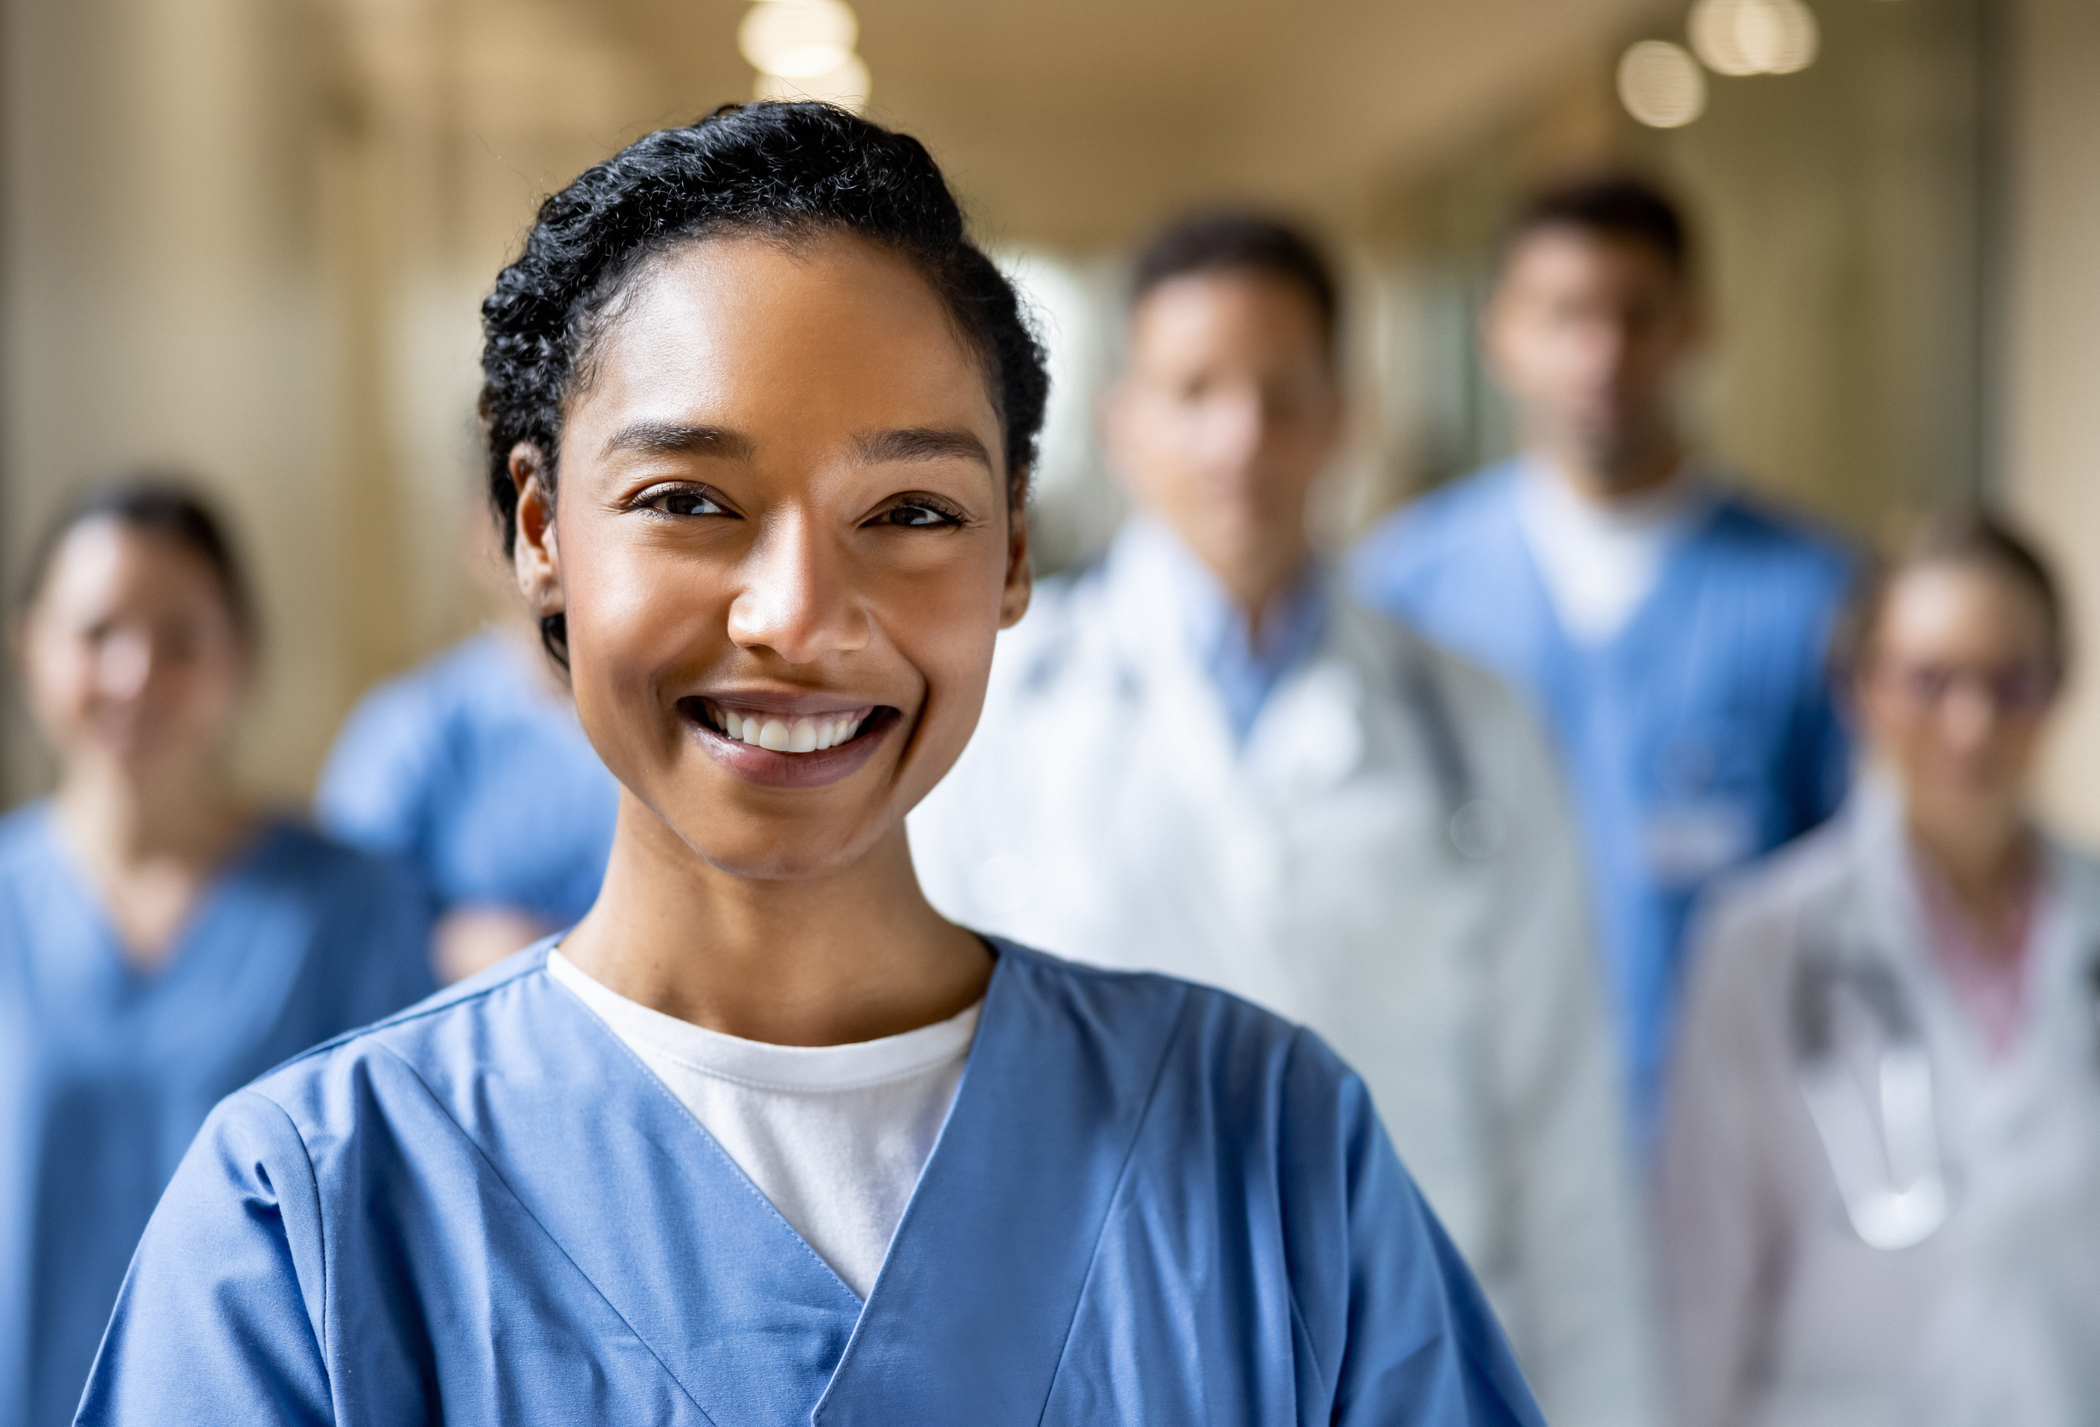 A doctor smiling with other doctors standing behind her